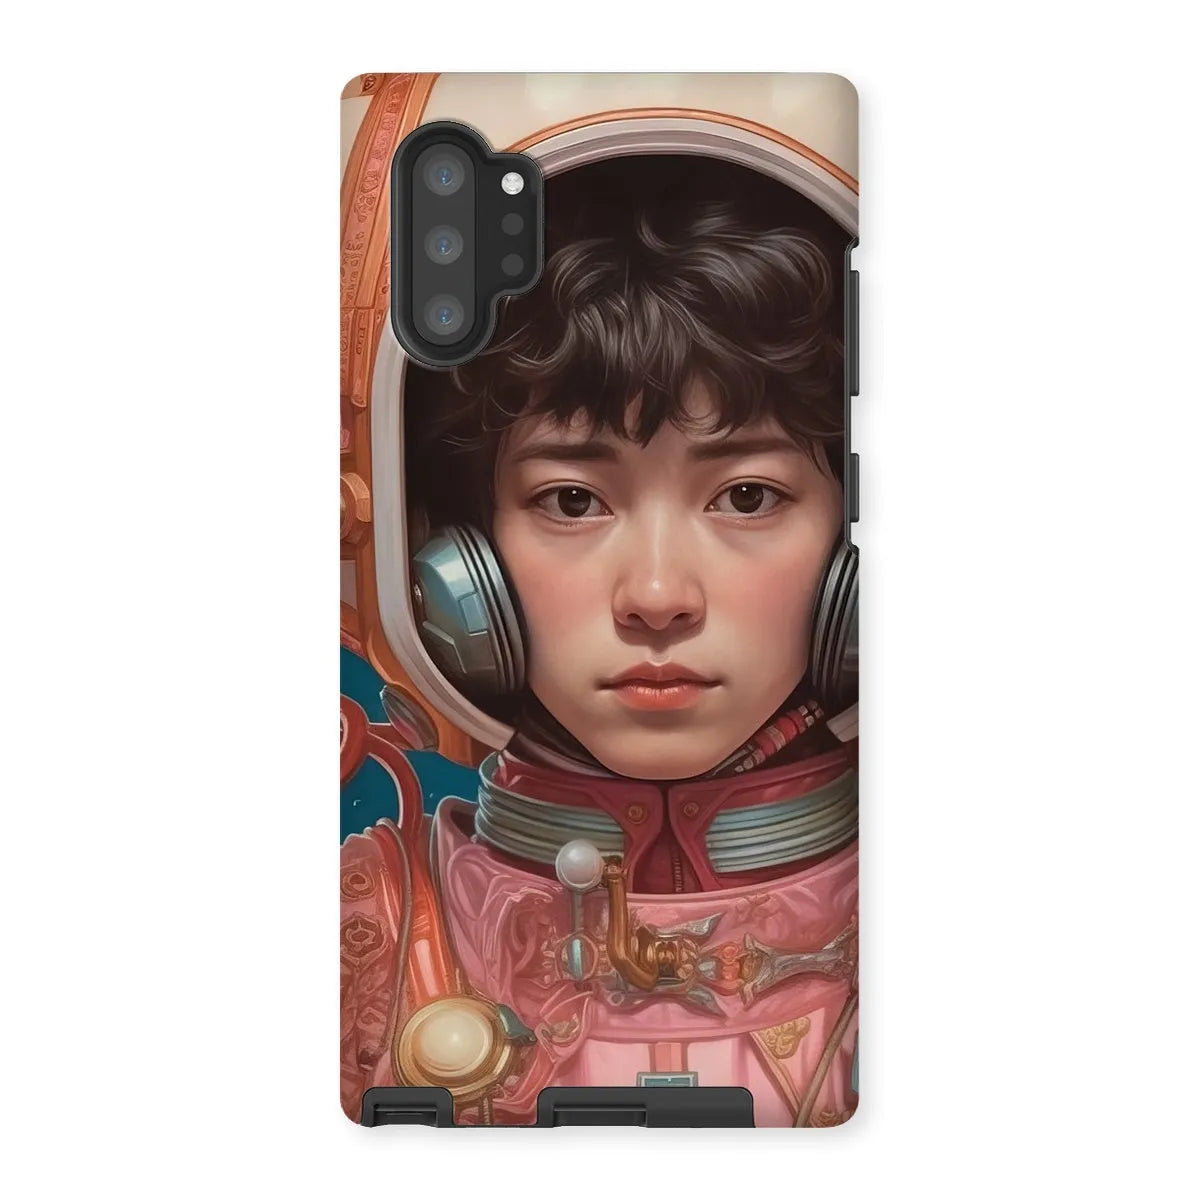 Kaito The Gay Astronaut - Lgbtq Art Phone Case - Samsung Galaxy Note 10p / Matte - Mobile Phone Cases - Aesthetic Art